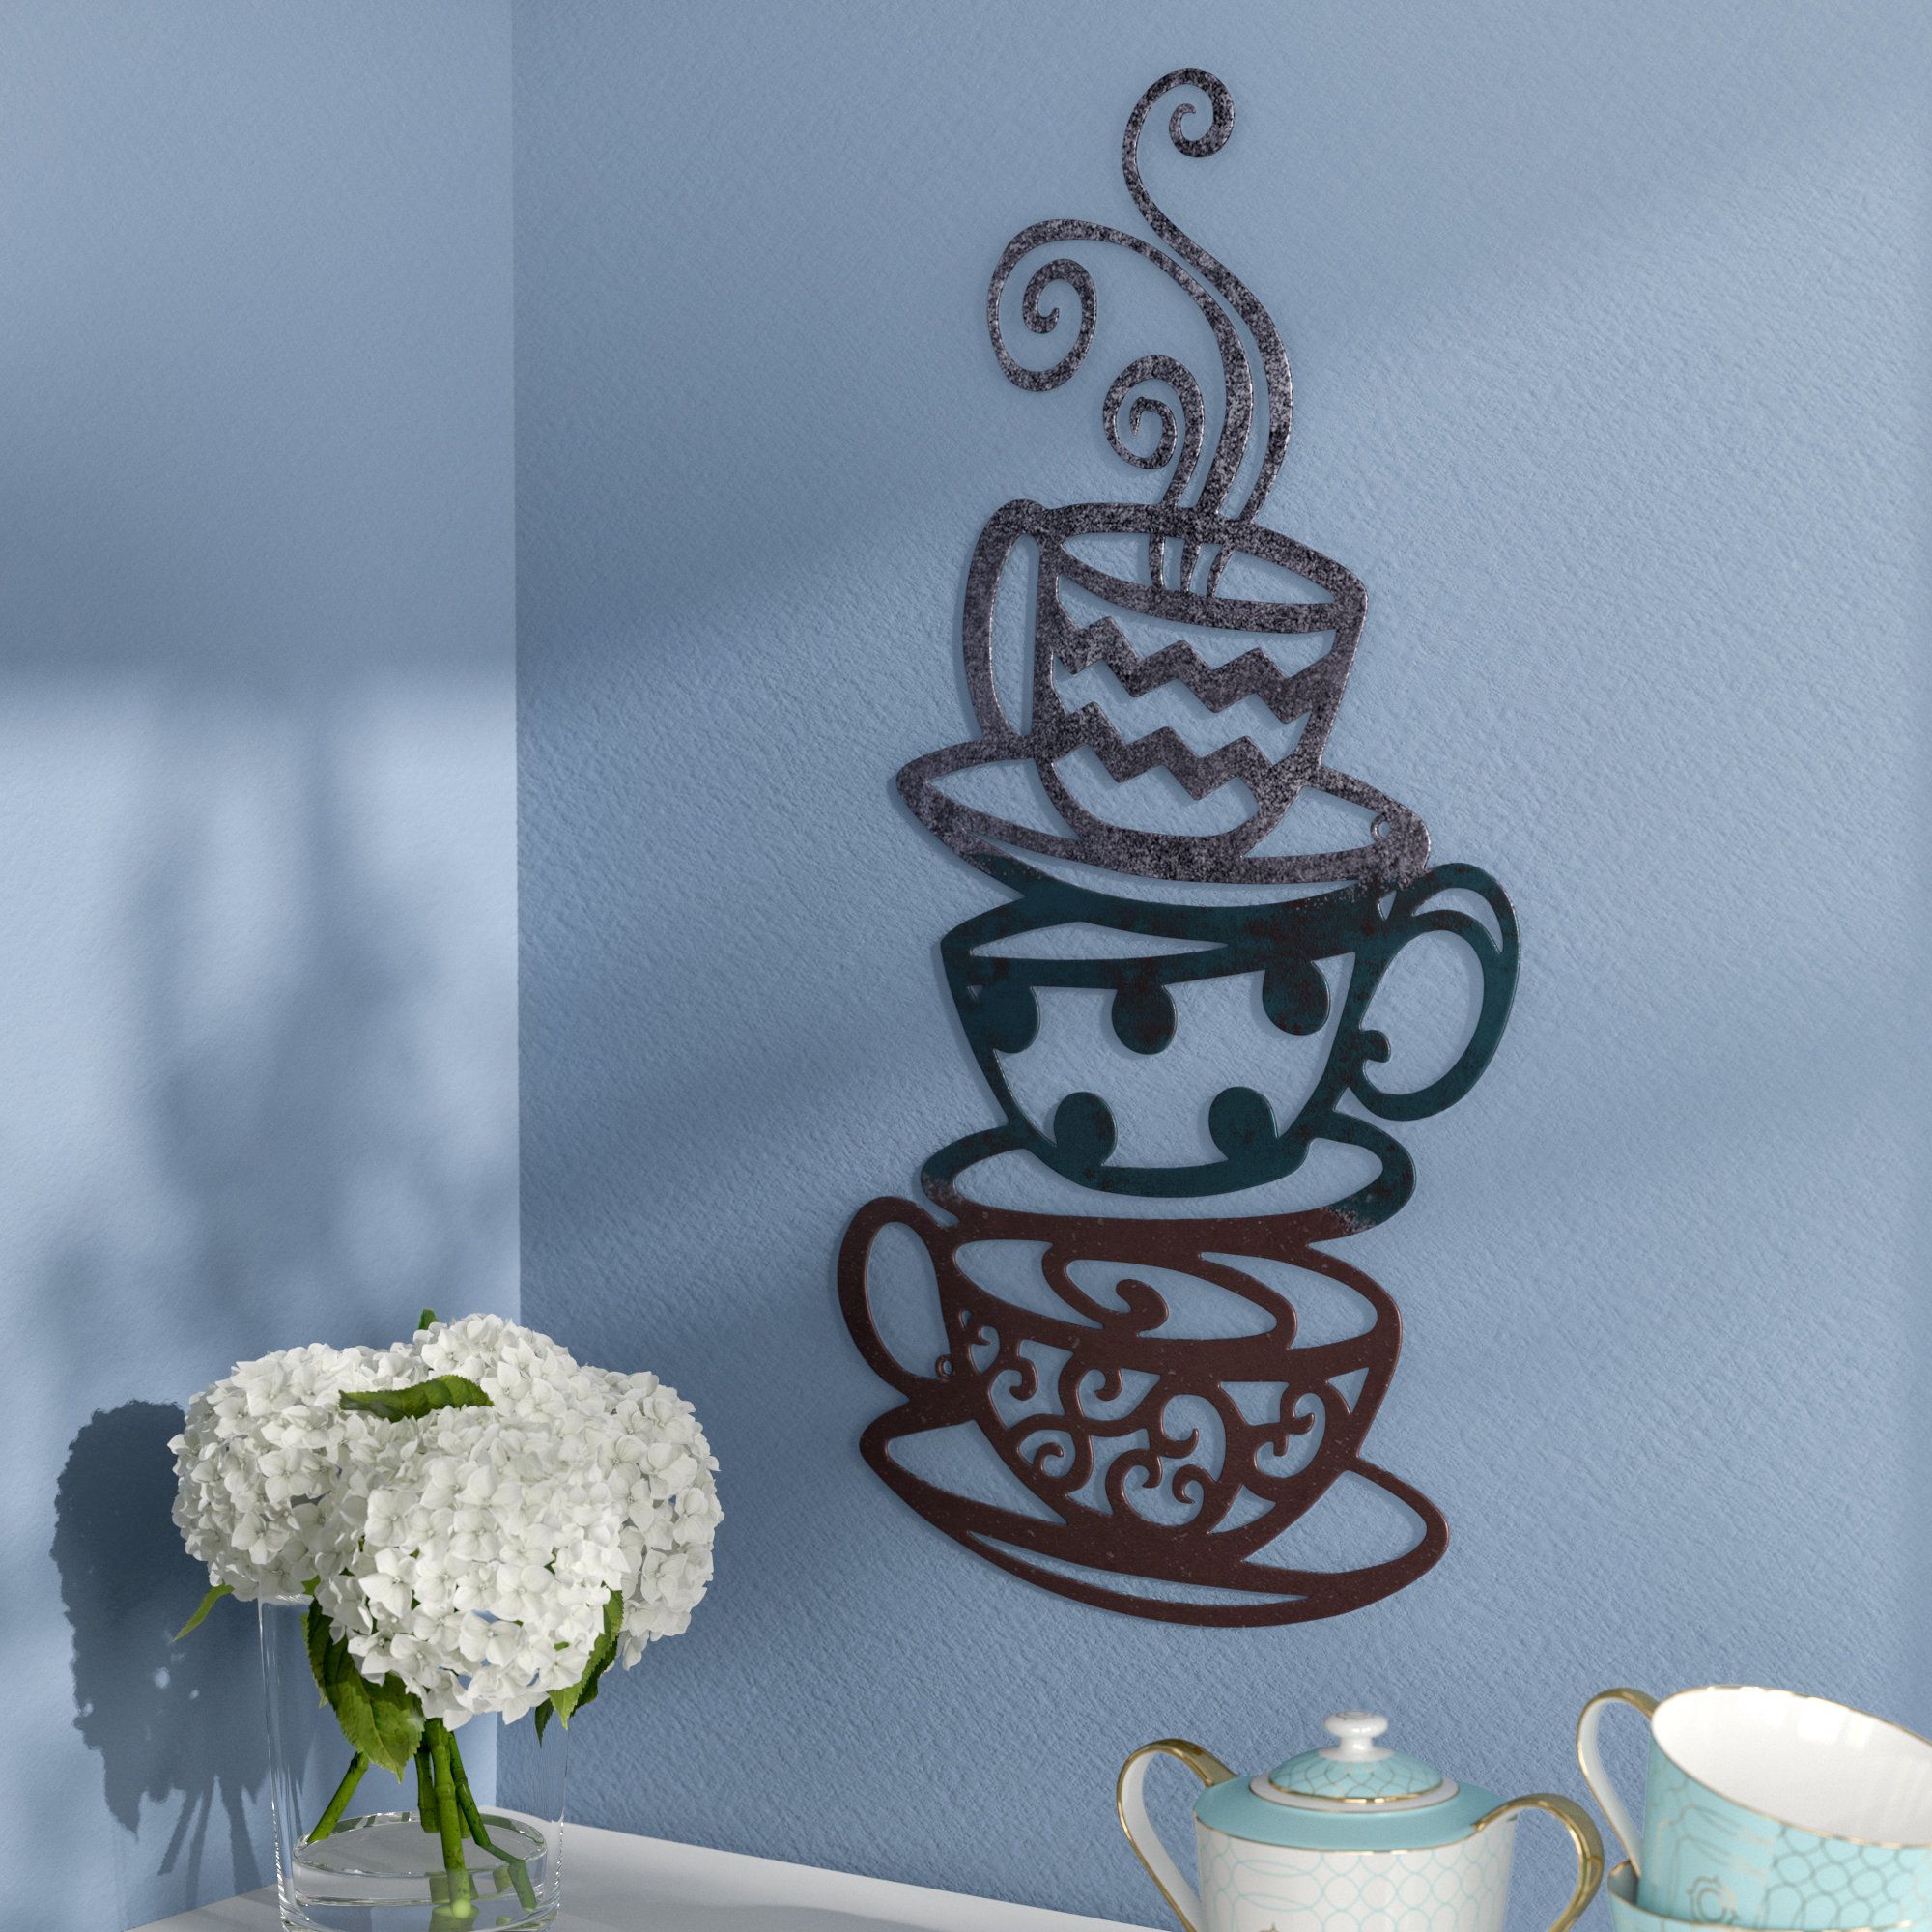 Decorative Three Stacked Coffee Tea Cups Iron Widget Wall Decor Intended For Well Liked Winston Porter Decorative Three Stacked Coffee Tea Cups Iron Widget (View 1 of 20)